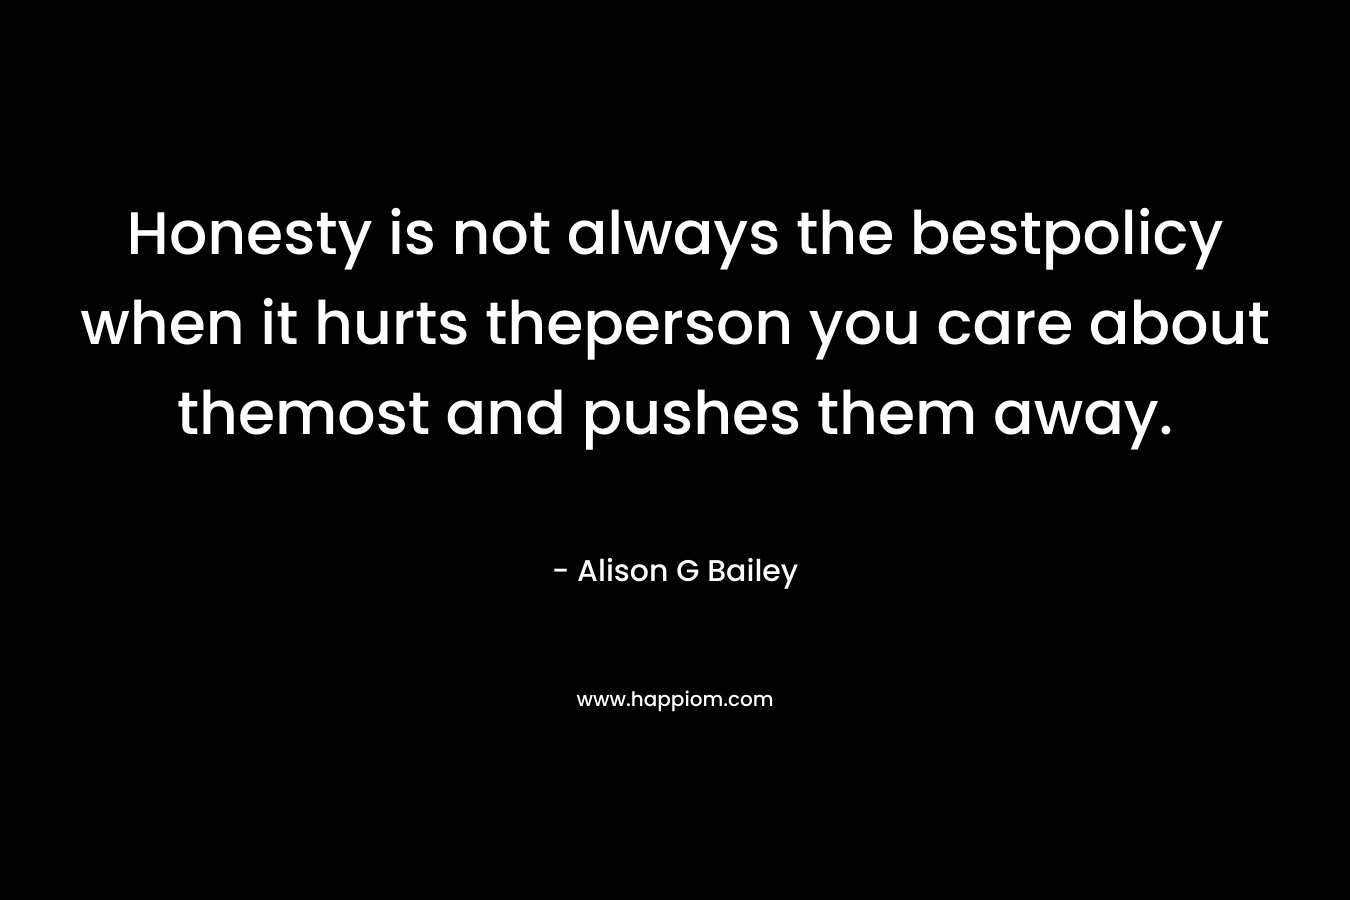 Honesty is not always the bestpolicy when it hurts theperson you care about themost and pushes them away. – Alison G Bailey